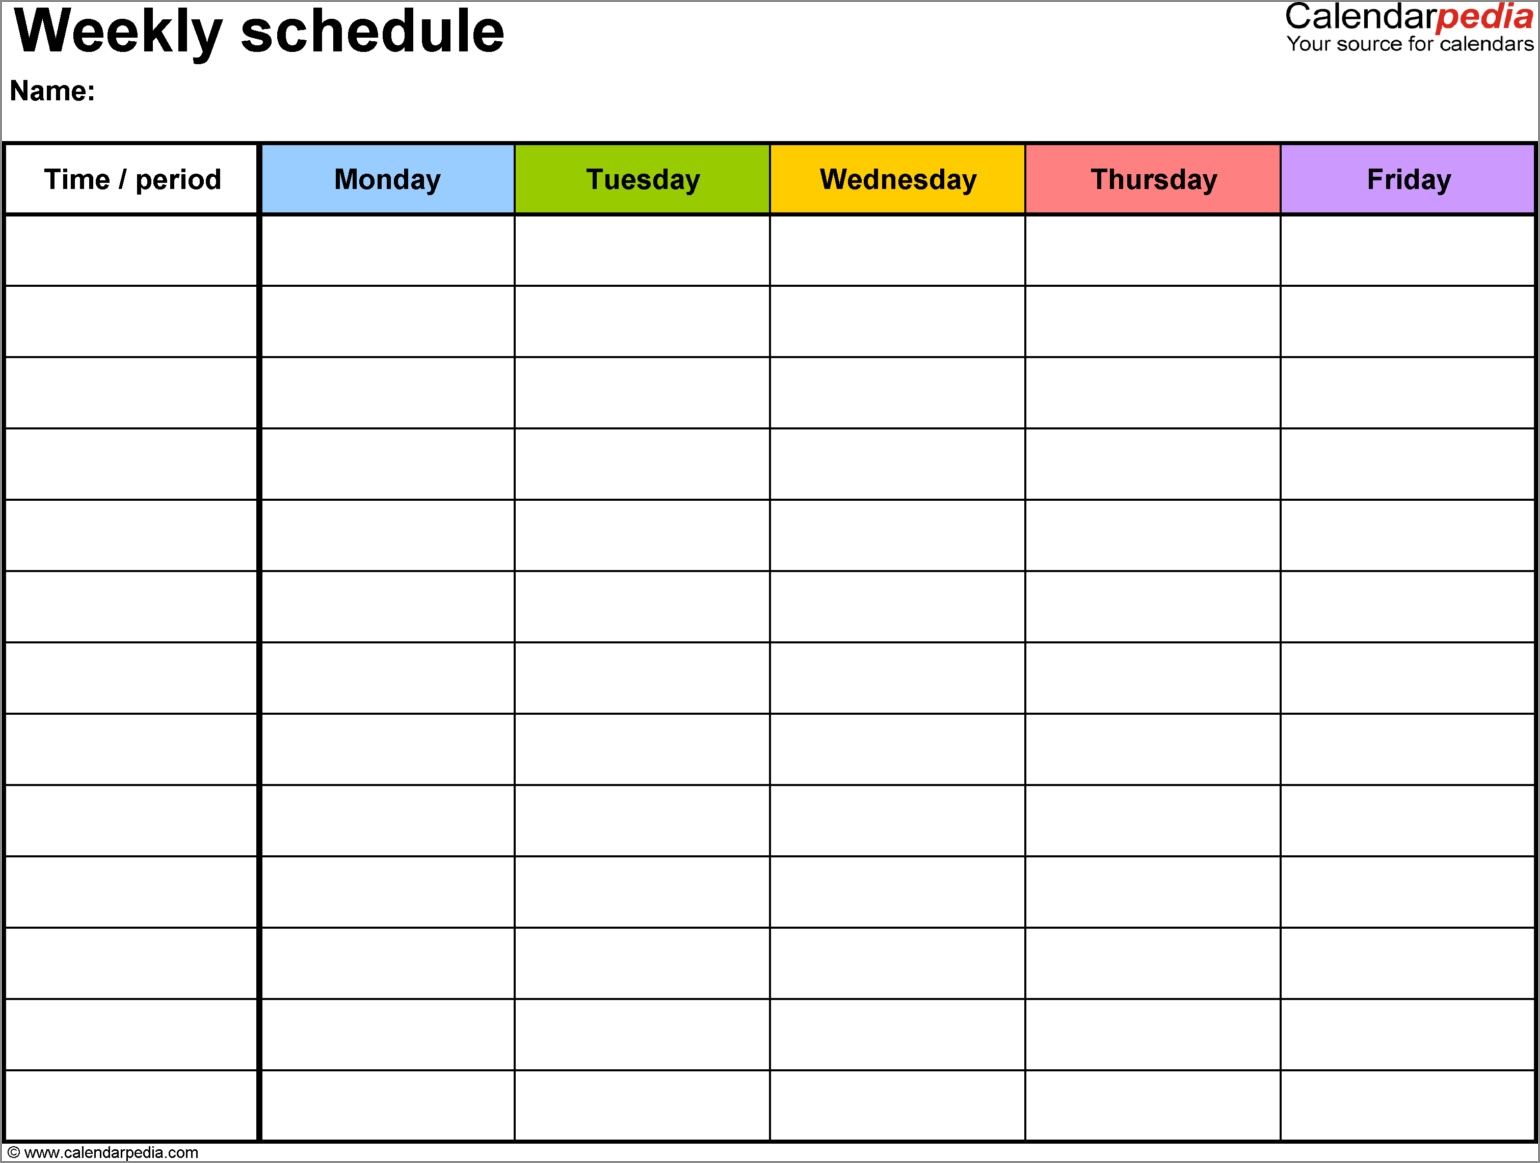 calendar template for schedule example